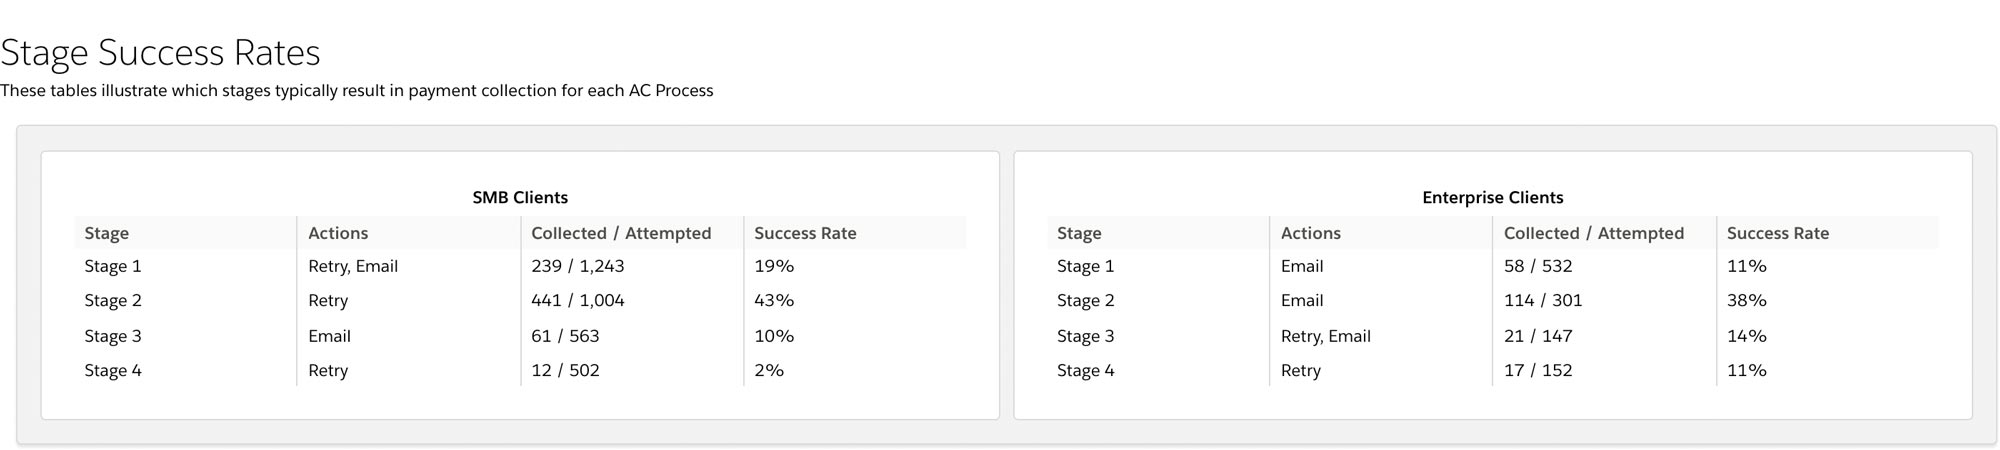 Stage Success Rates